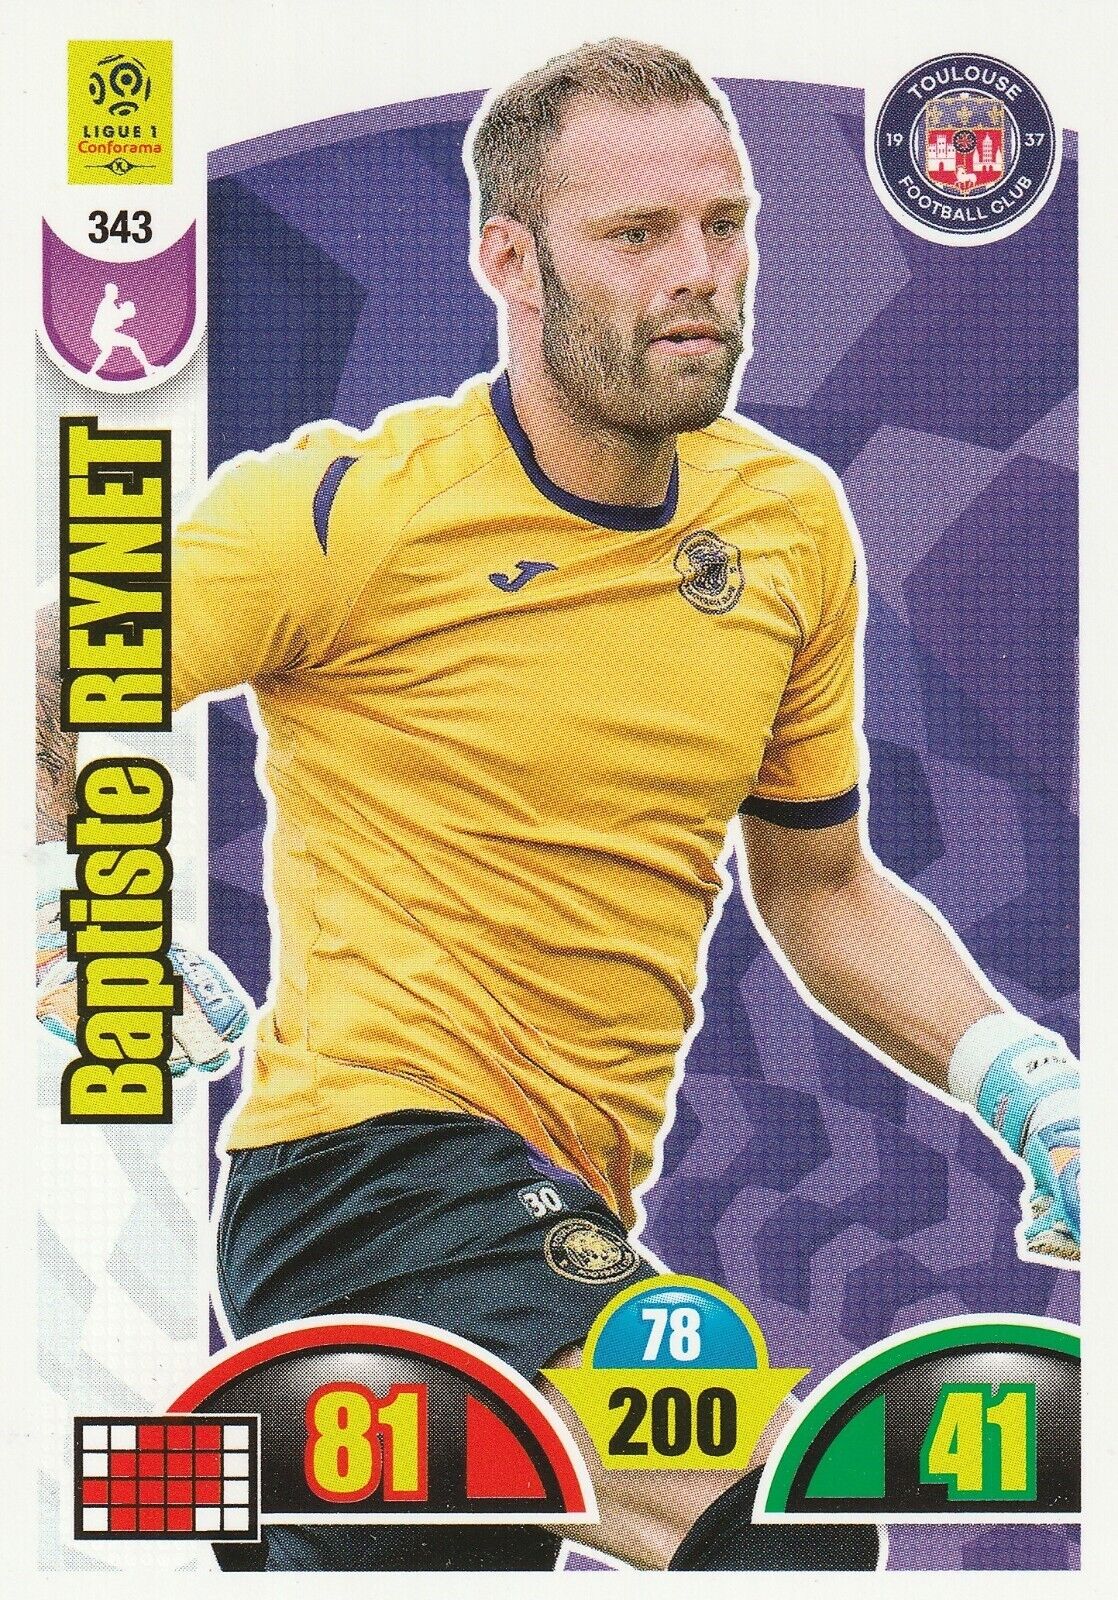 TOULOUSE FC - PANINI ADRENALYN XL FOOTBALL CARD 2018 / 2019 - to choose from